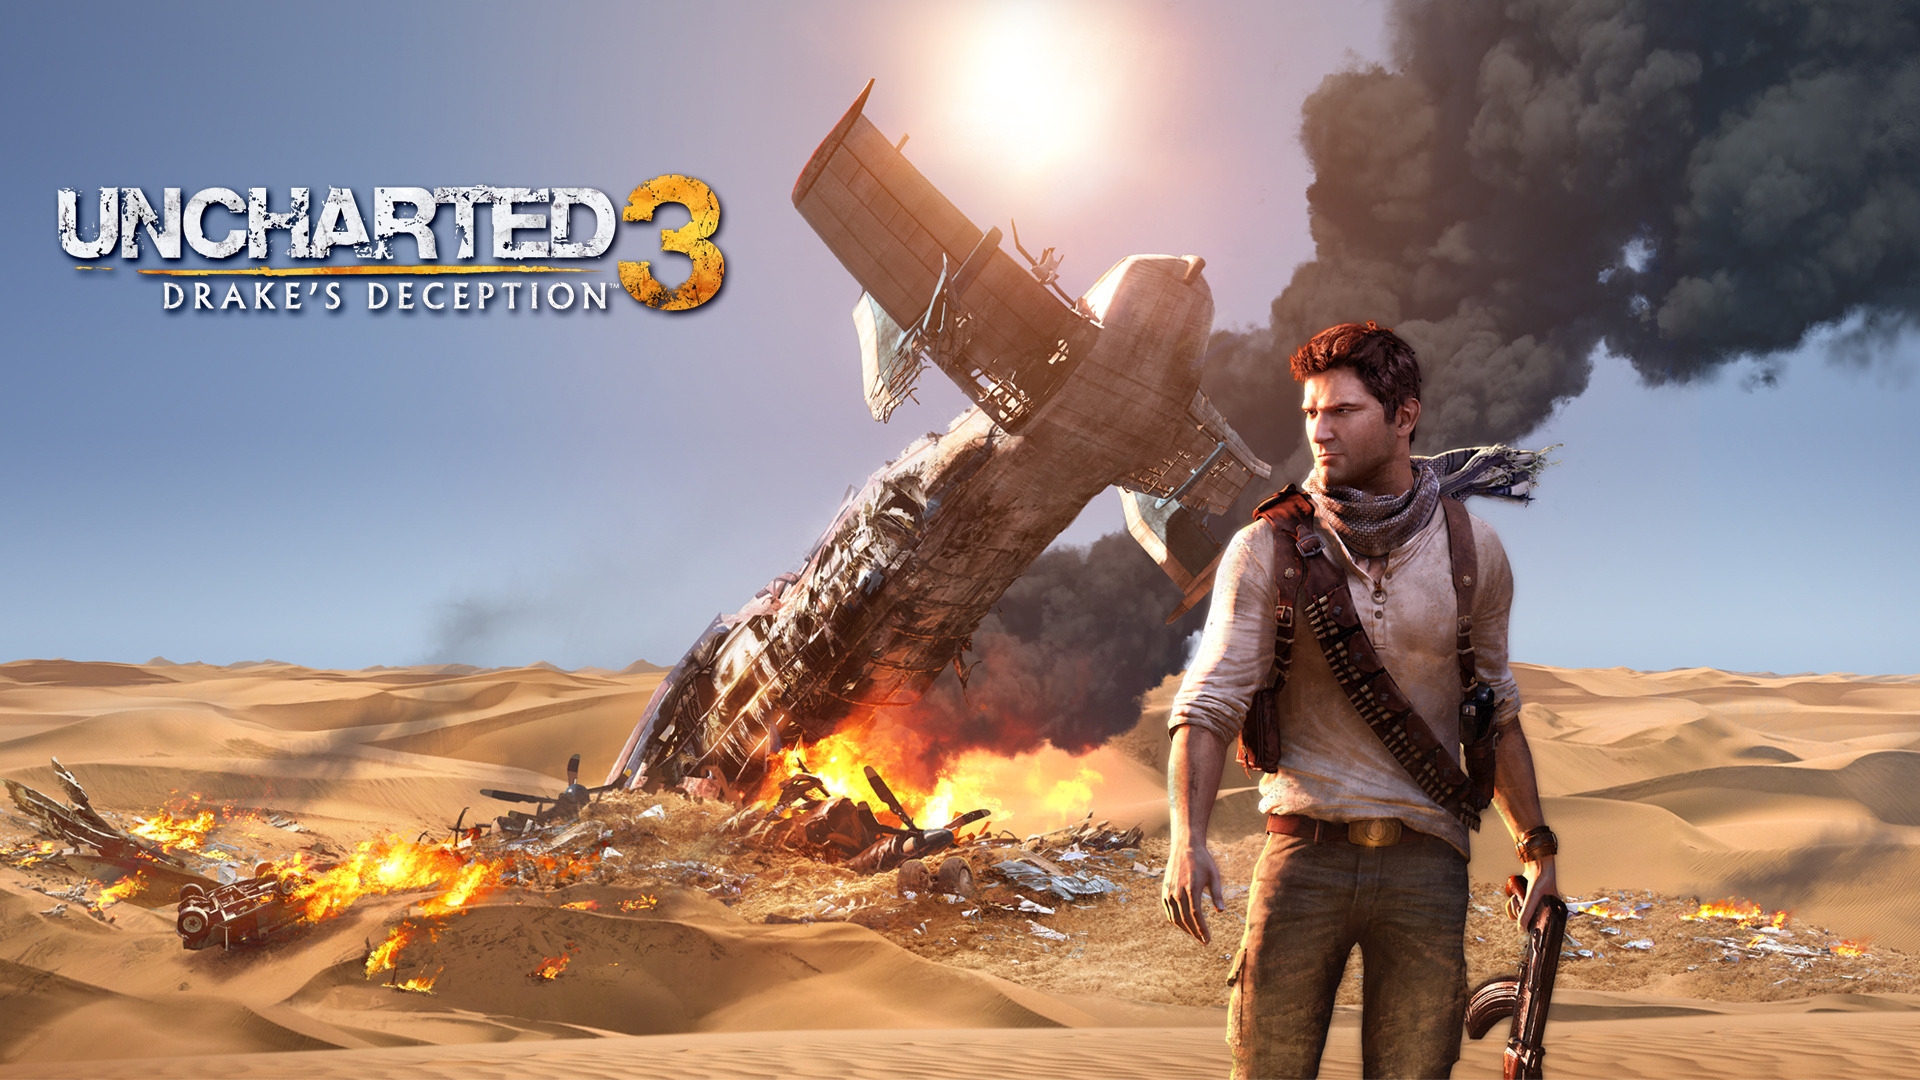 Uncharted 3 Drake Deception for 1920 x 1080 HDTV 1080p resolution